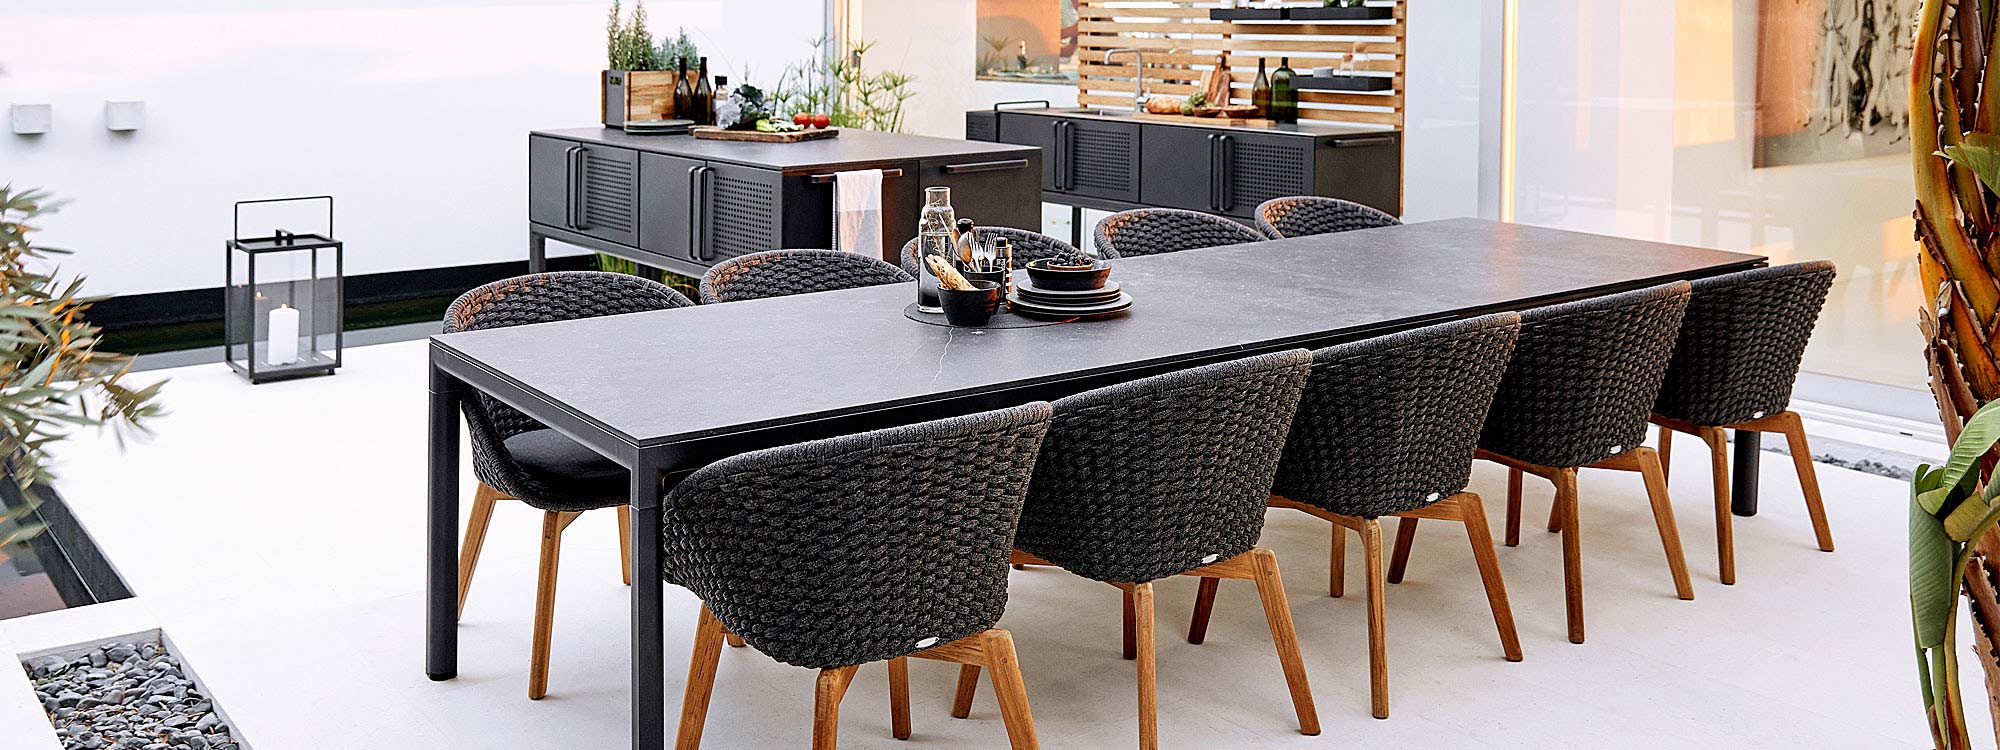 Image of dark-grey and teak Peacock garden chairs and lava-grey Drop ceramic garden table by Cane-line, with Drop outdoor kitchen island in background